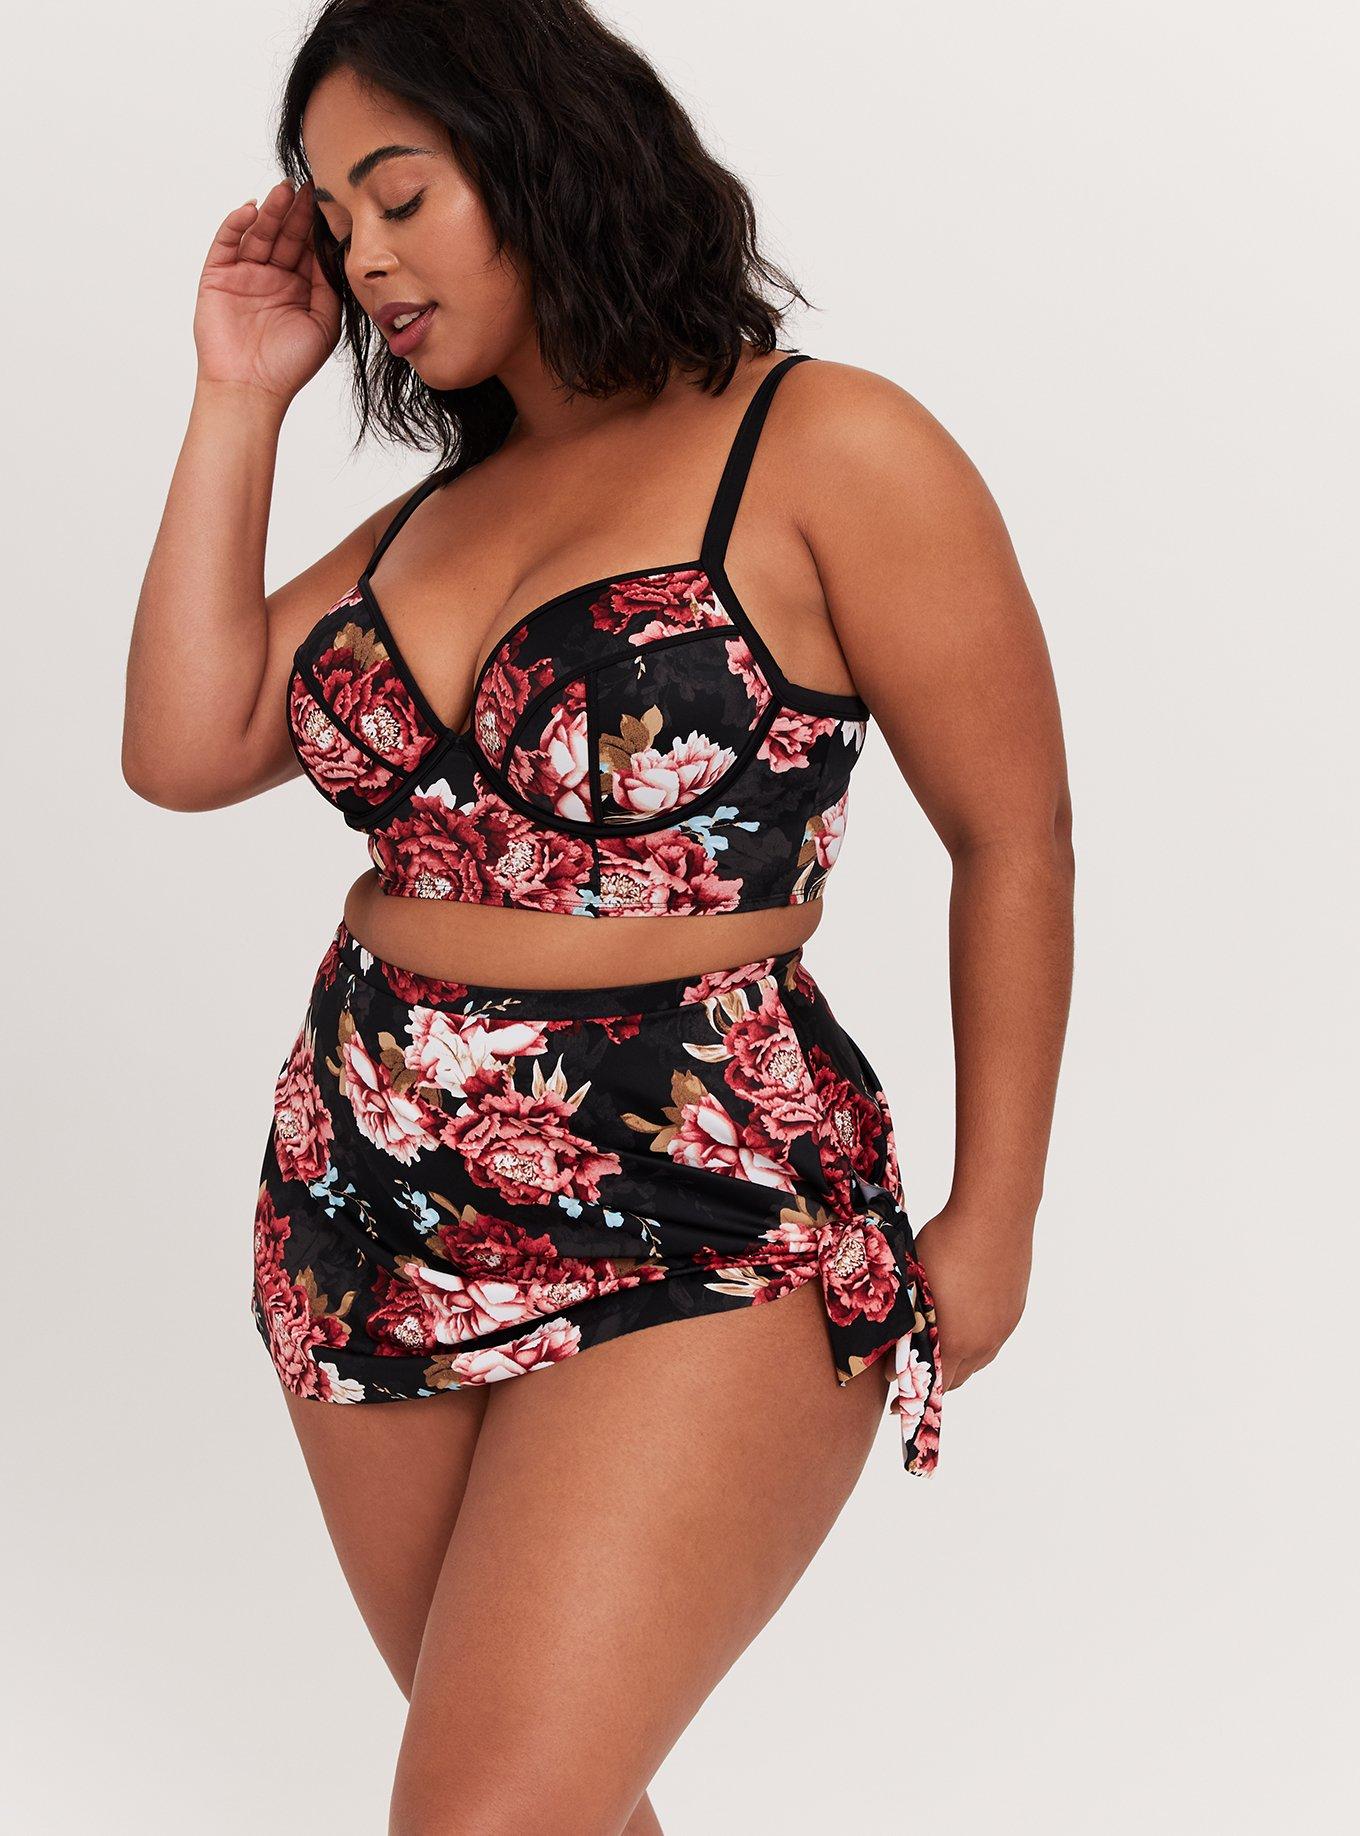 try on my torrid order with me ! for reference im a 6x/30 :) Plus size